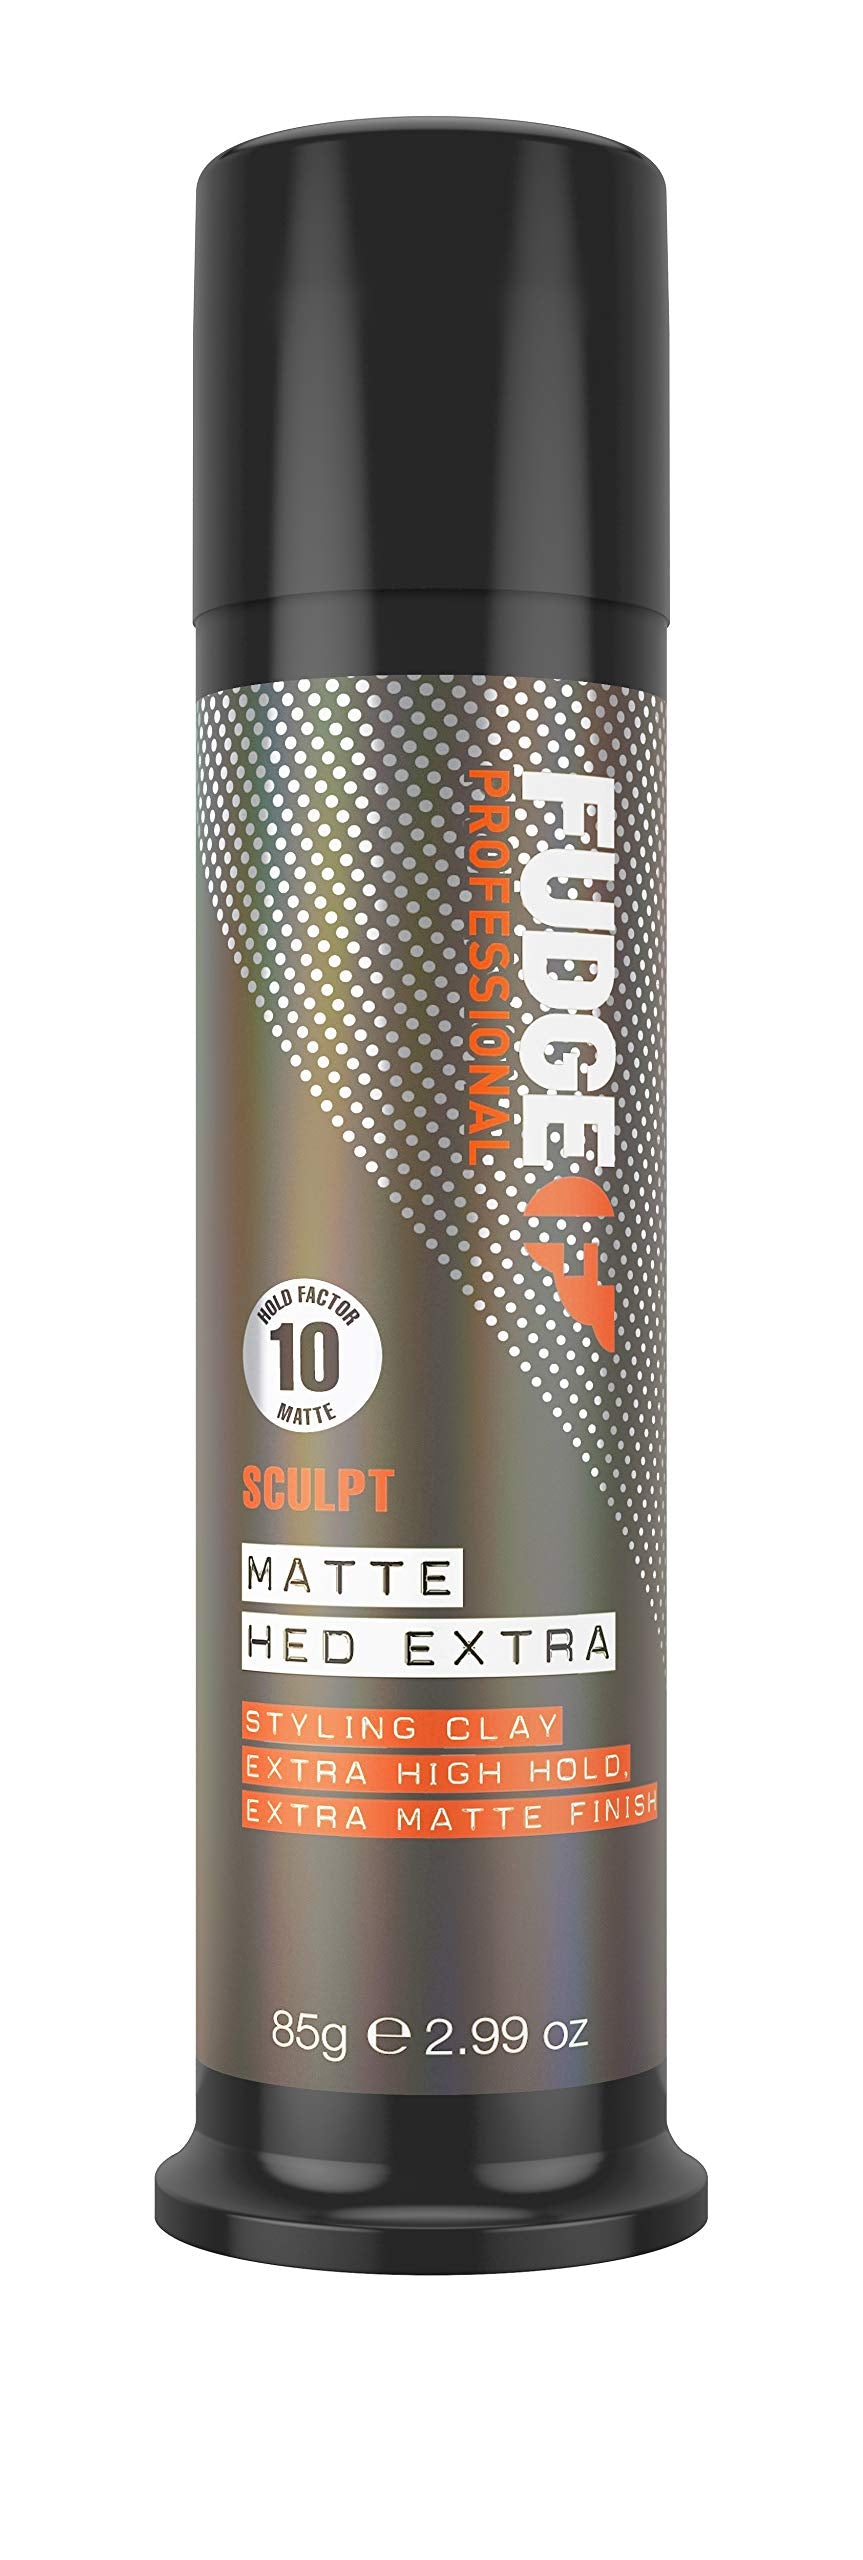 Fudge Professional Hair Wax, Matte Hed Extra, Extreme Hold, Texturising Hair Styling Product for Men, Matt Effect Texture Clay, Infused With Kaolin Clay, 85 g